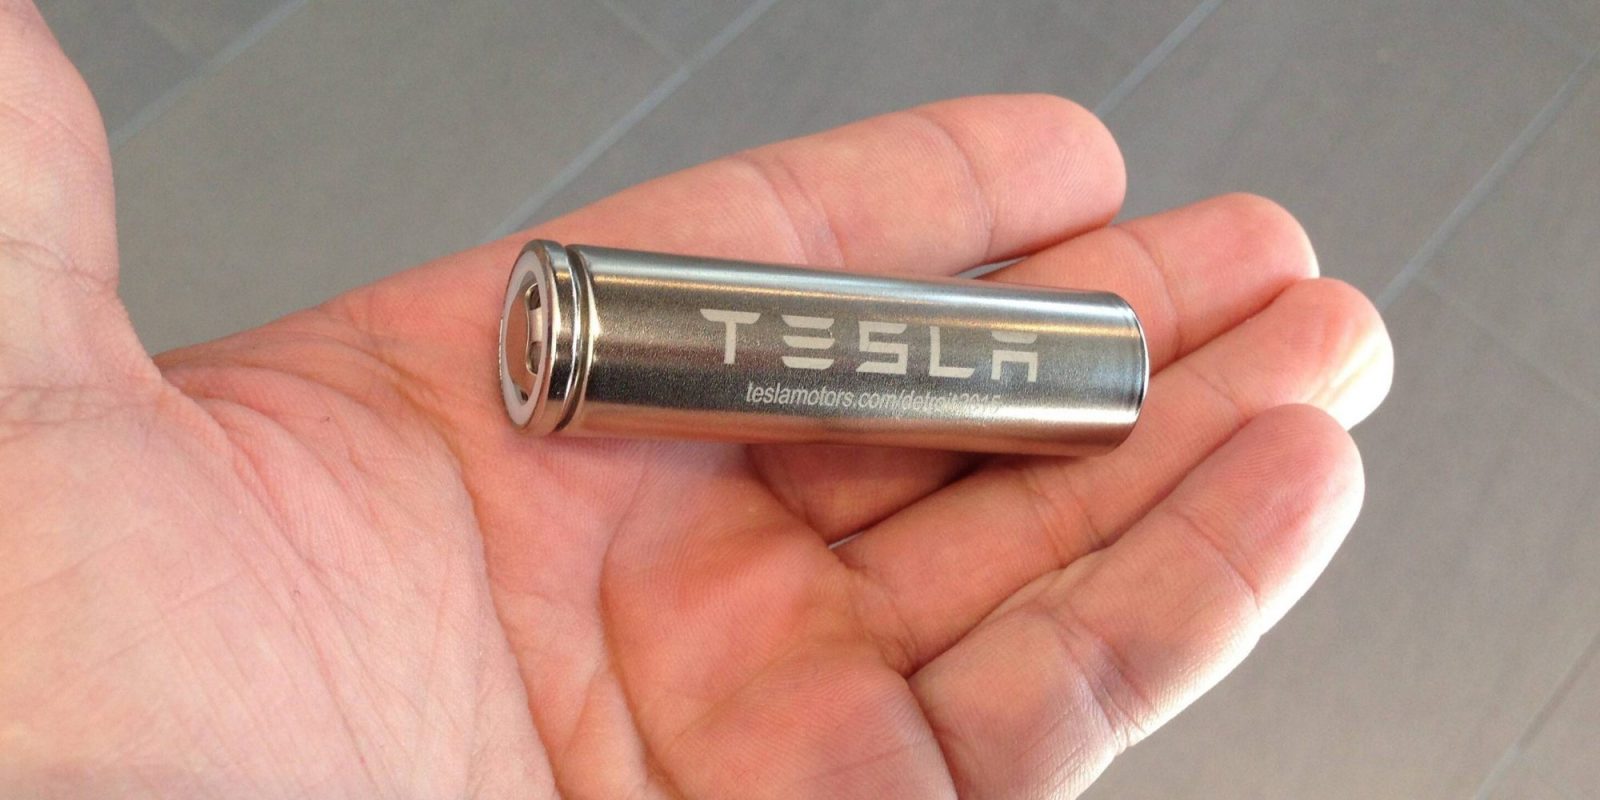 Tesla signs new battery cell agreement with CATL in race to secure large battery supply - Electrek